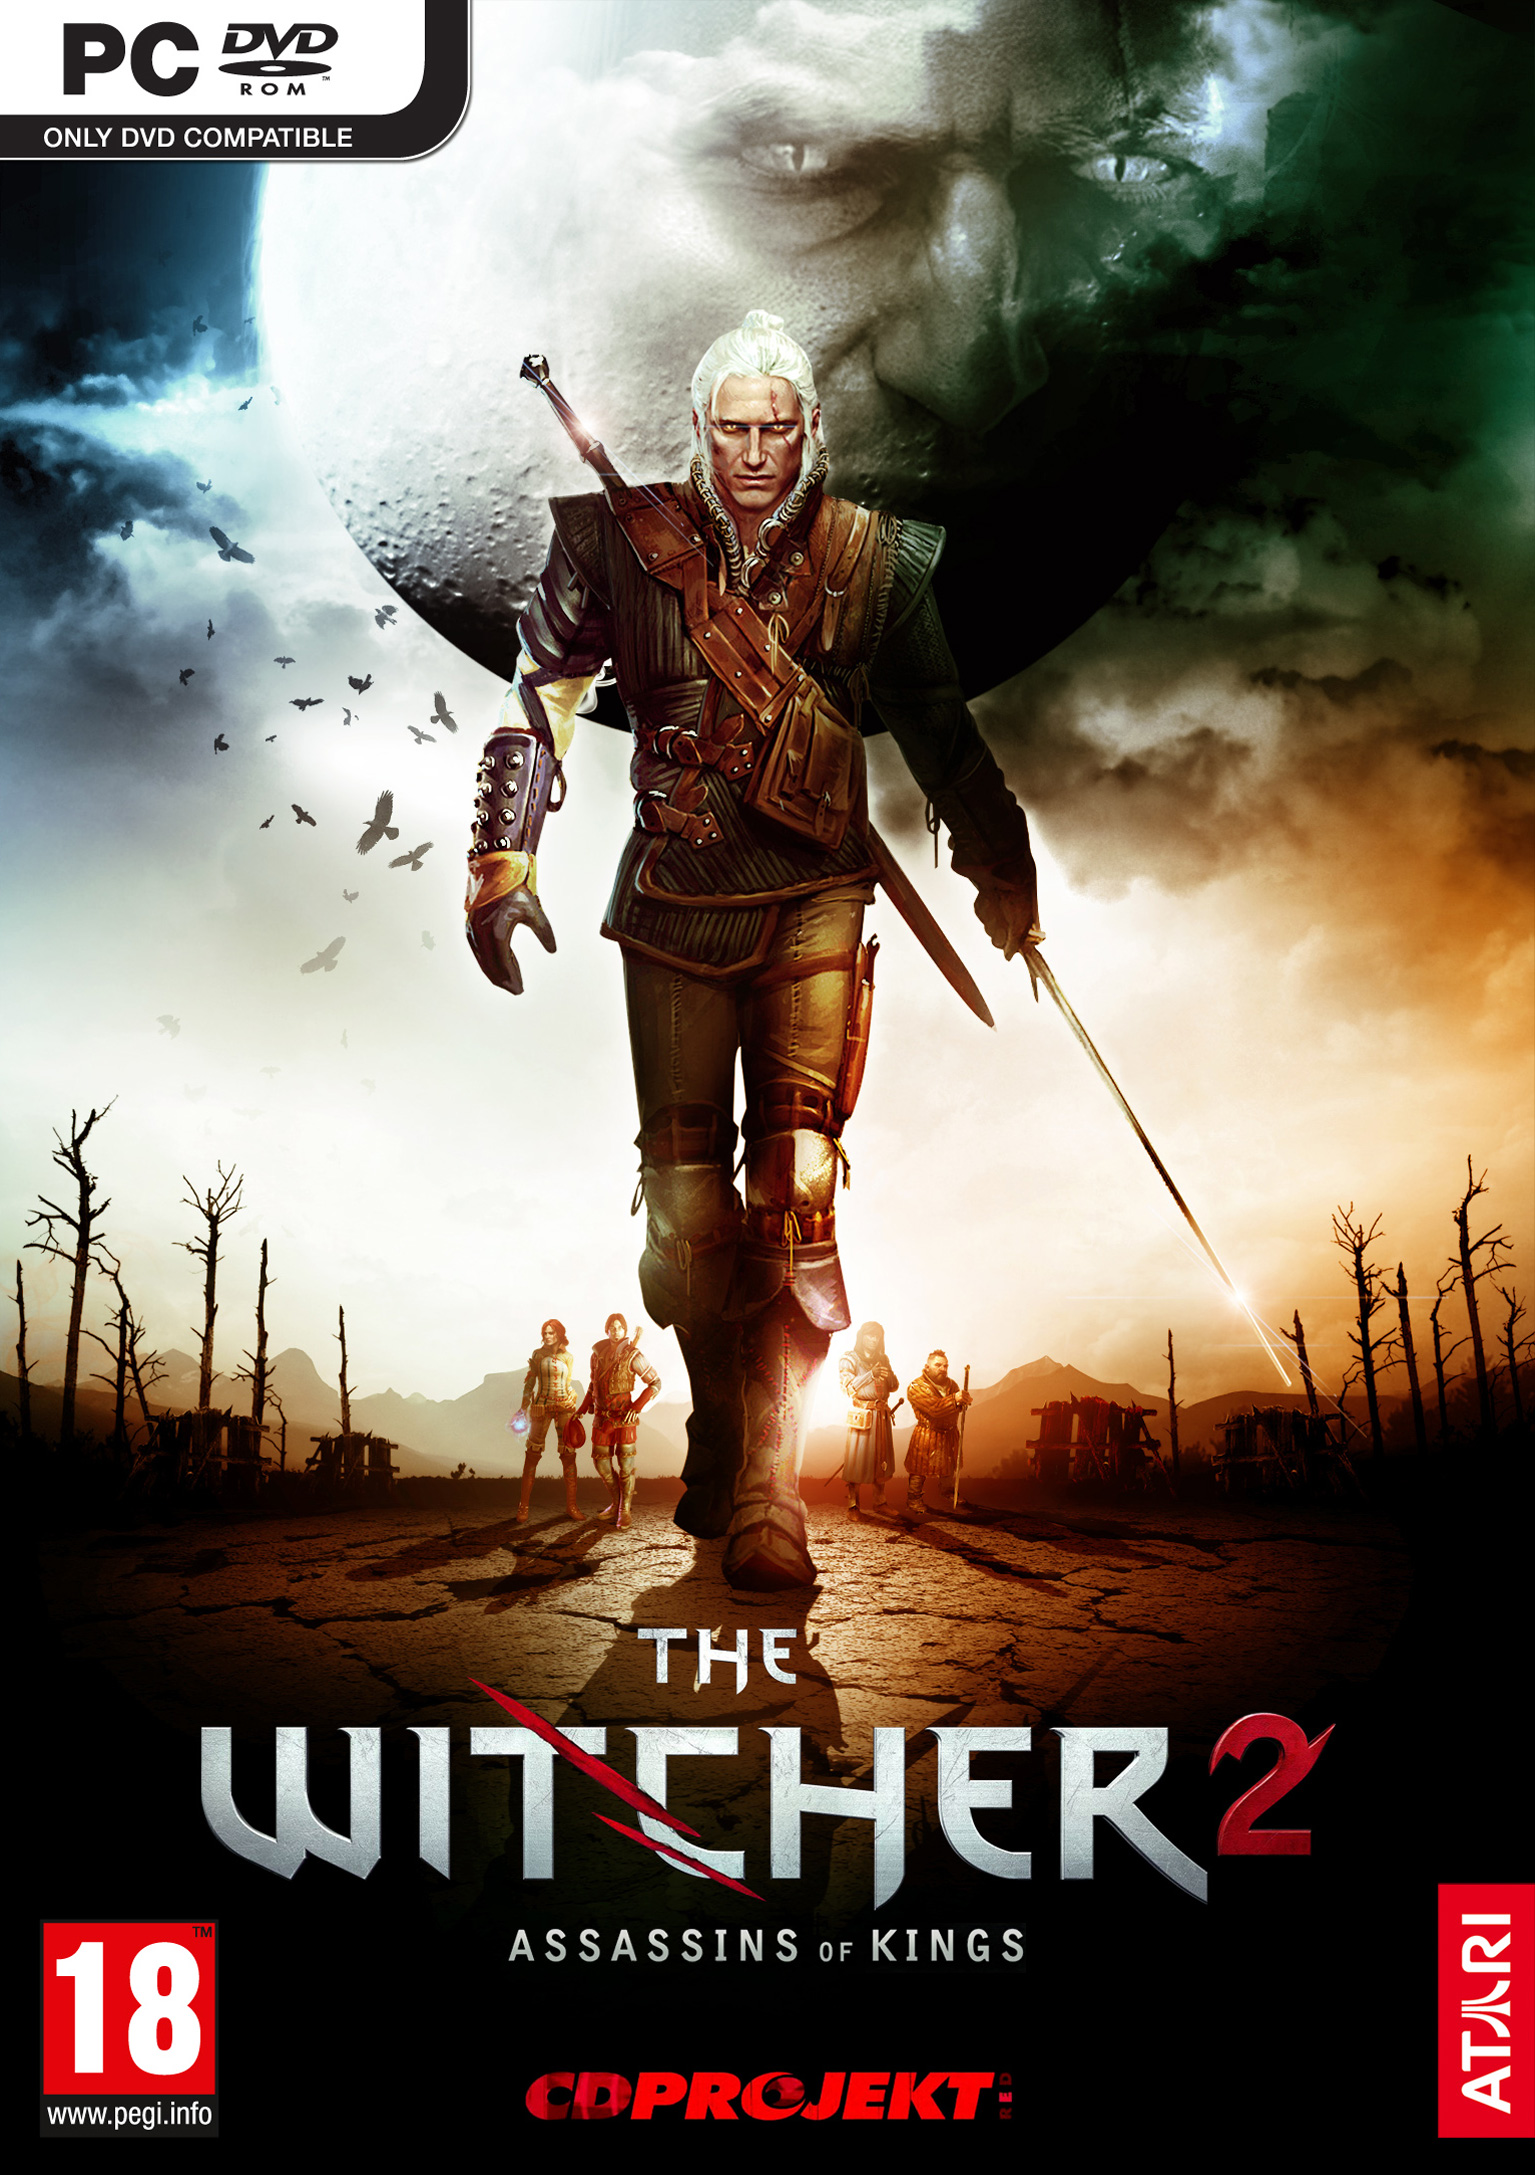 The Witcher 2: Assassins of Kings - predn DVD obal 3